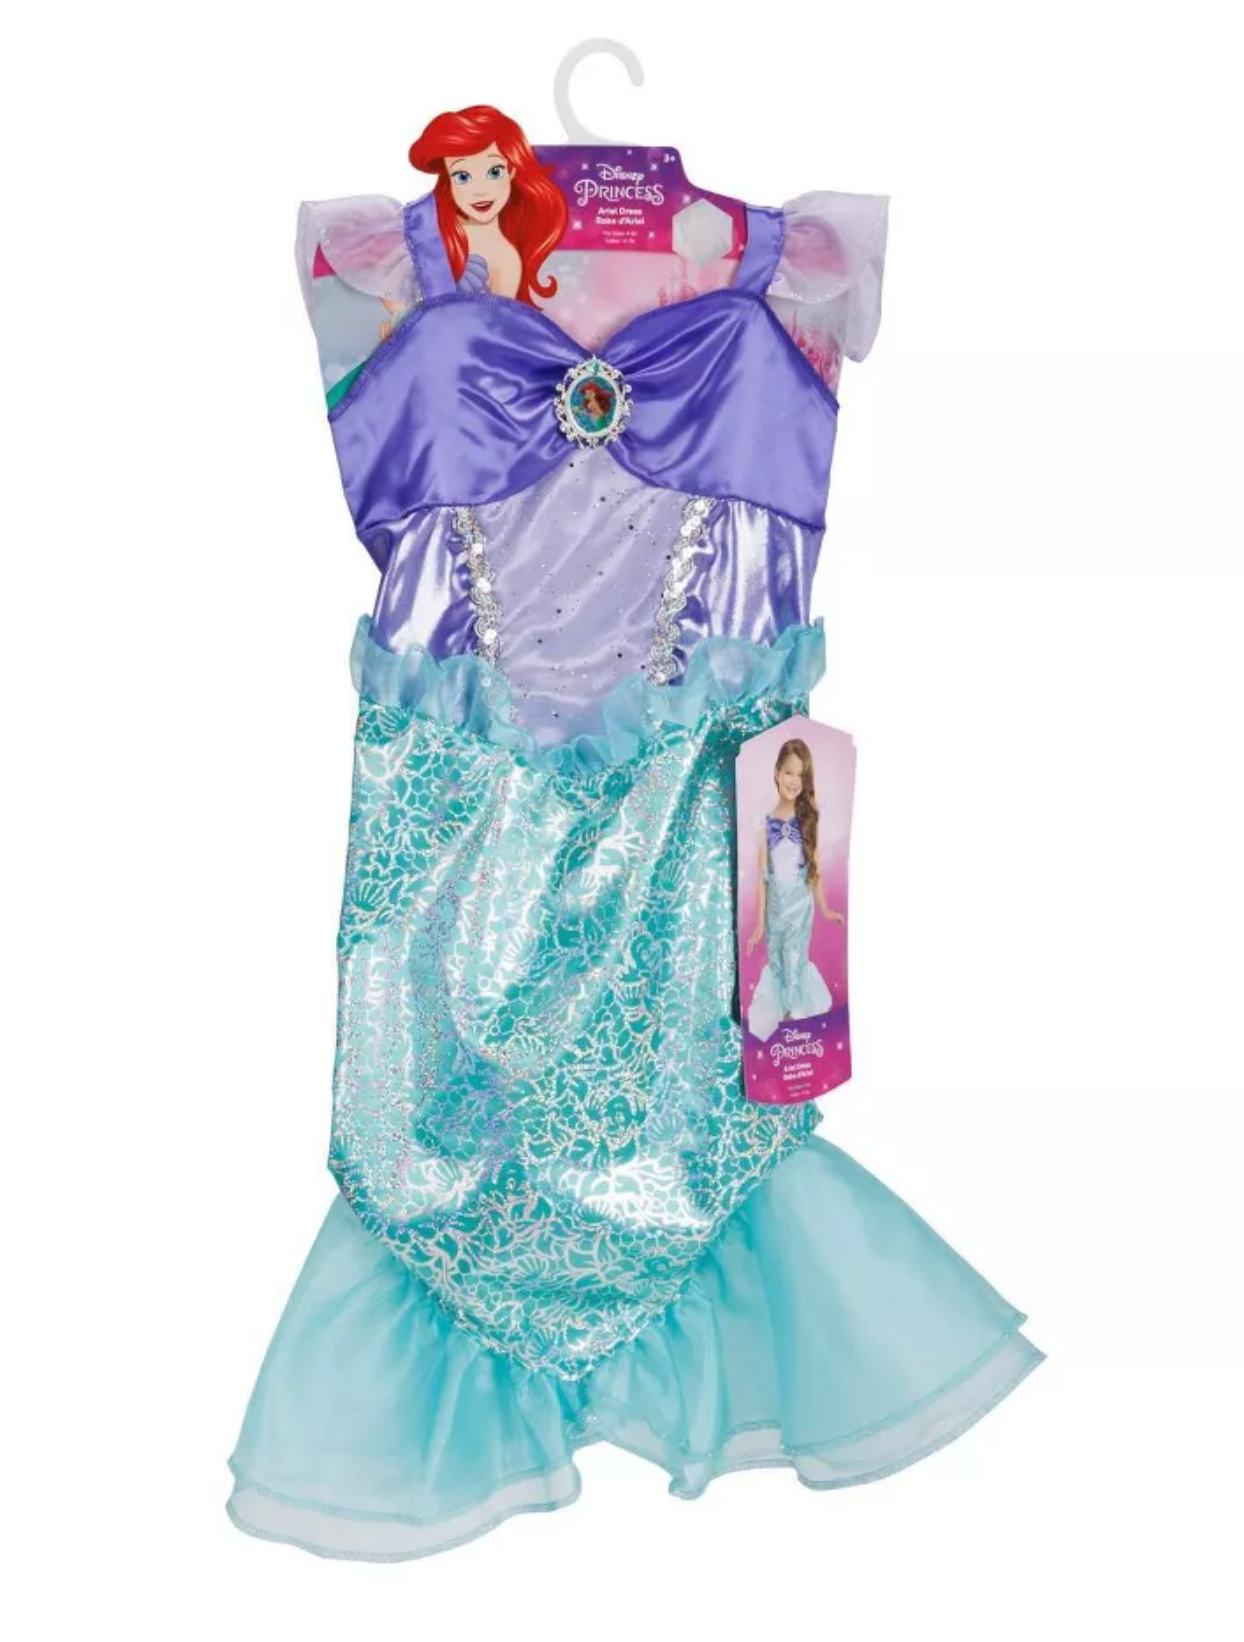 Disney Princess Ariel Satin Core Dress with Cameo Size 4-6x New with Tag